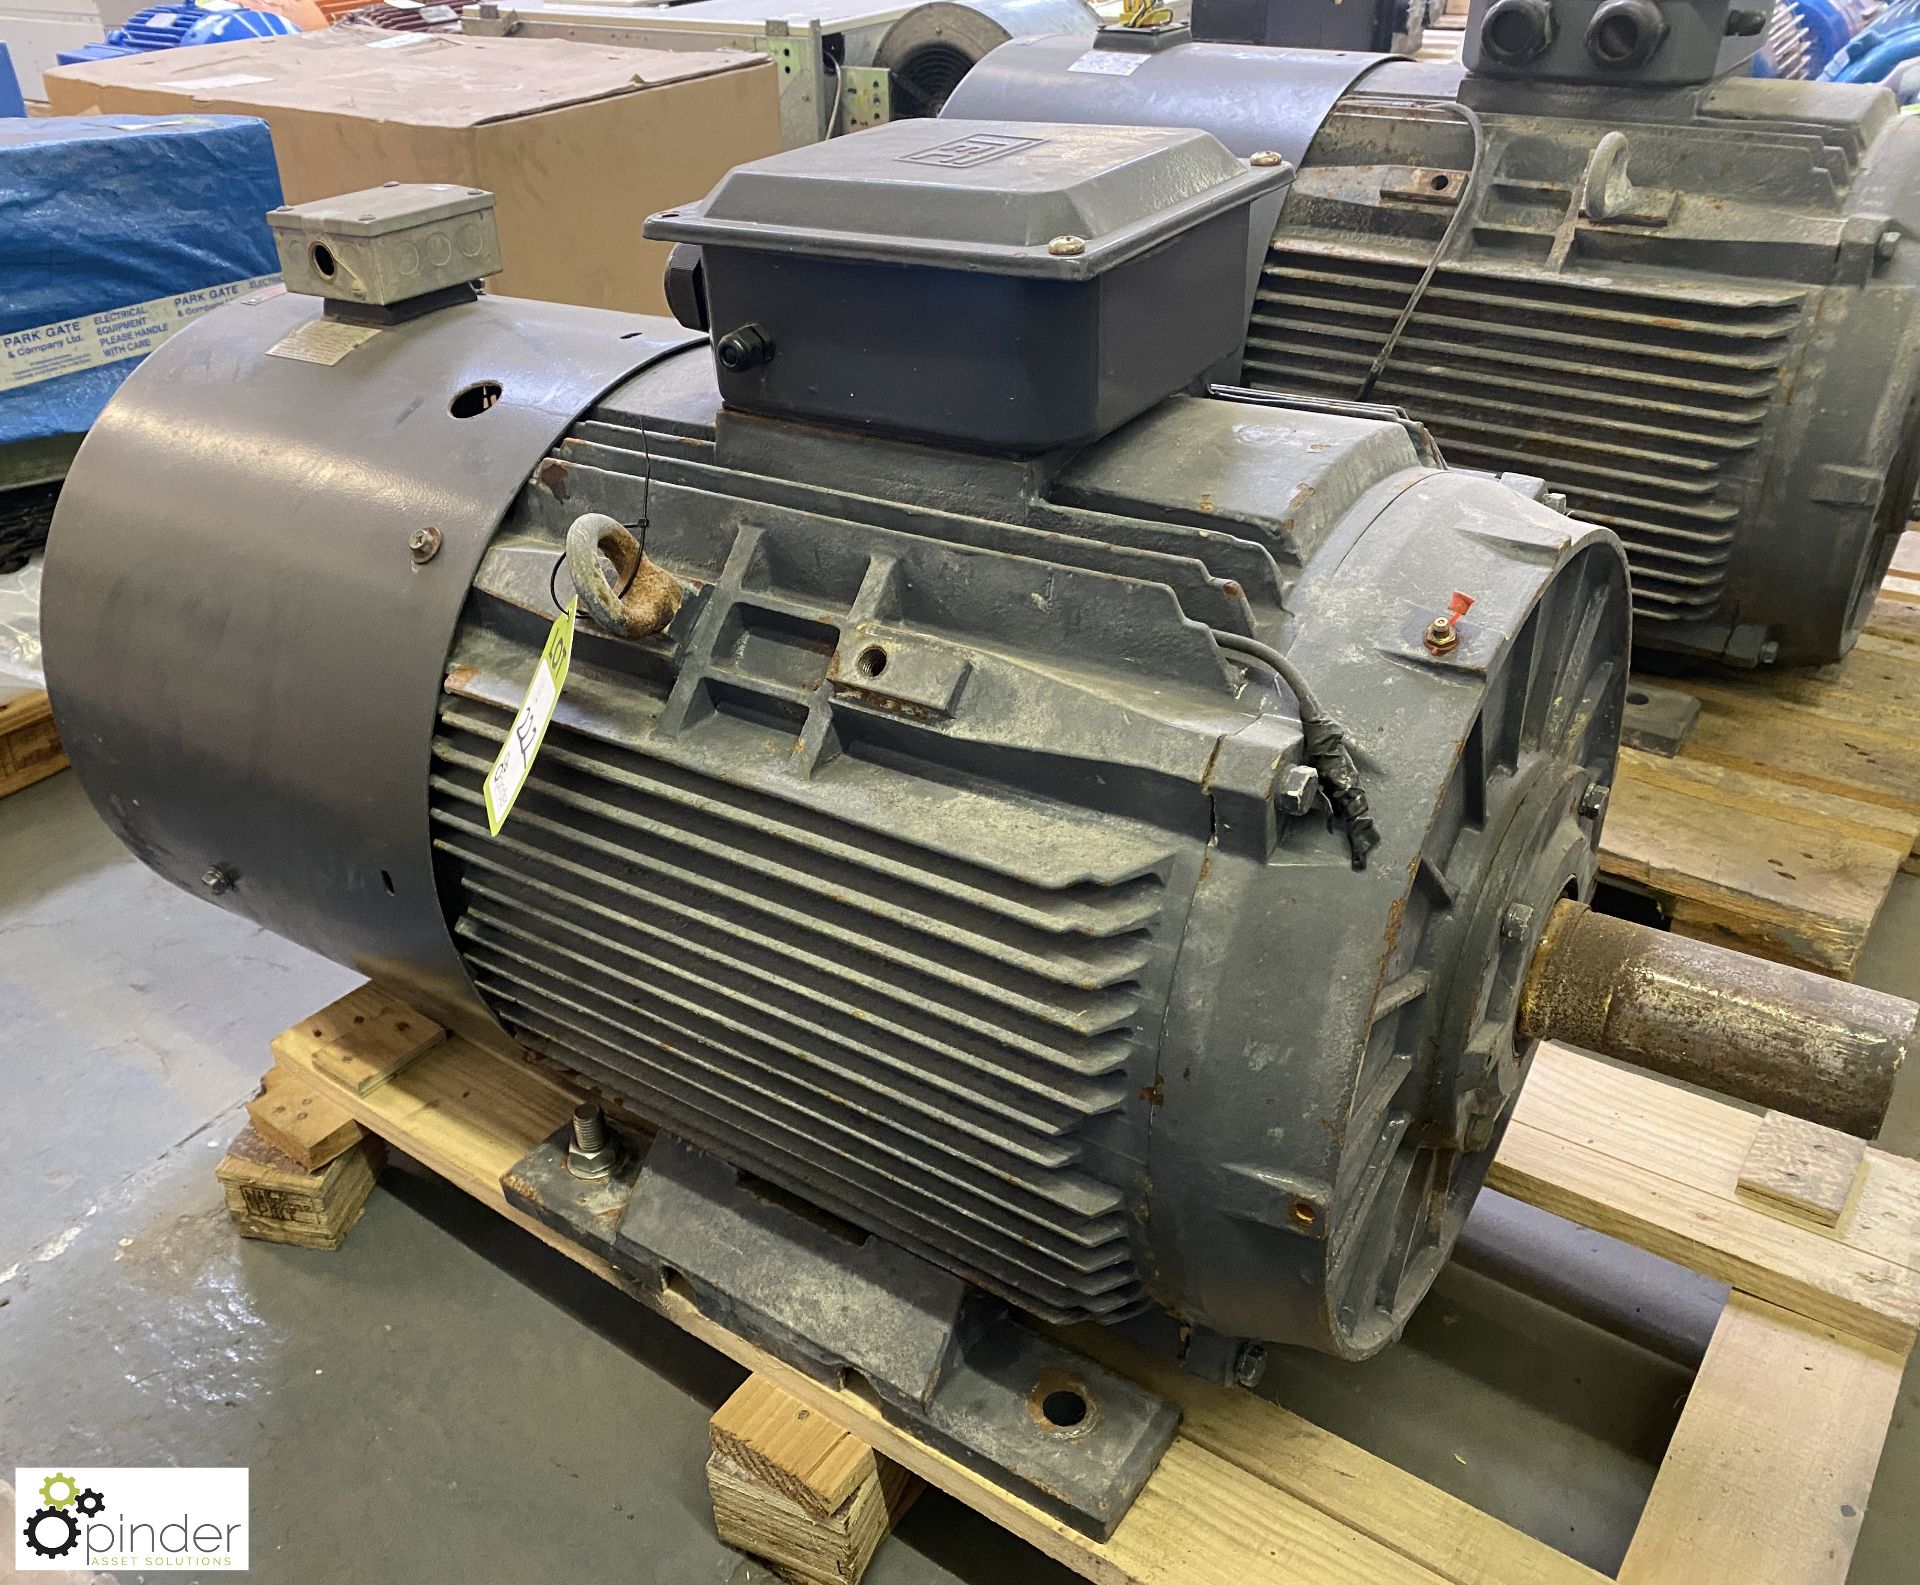 Tectop T2CR250M6 37kw Electric Motor, 975rpm, with blower unit (Location Carlisle Site 1)